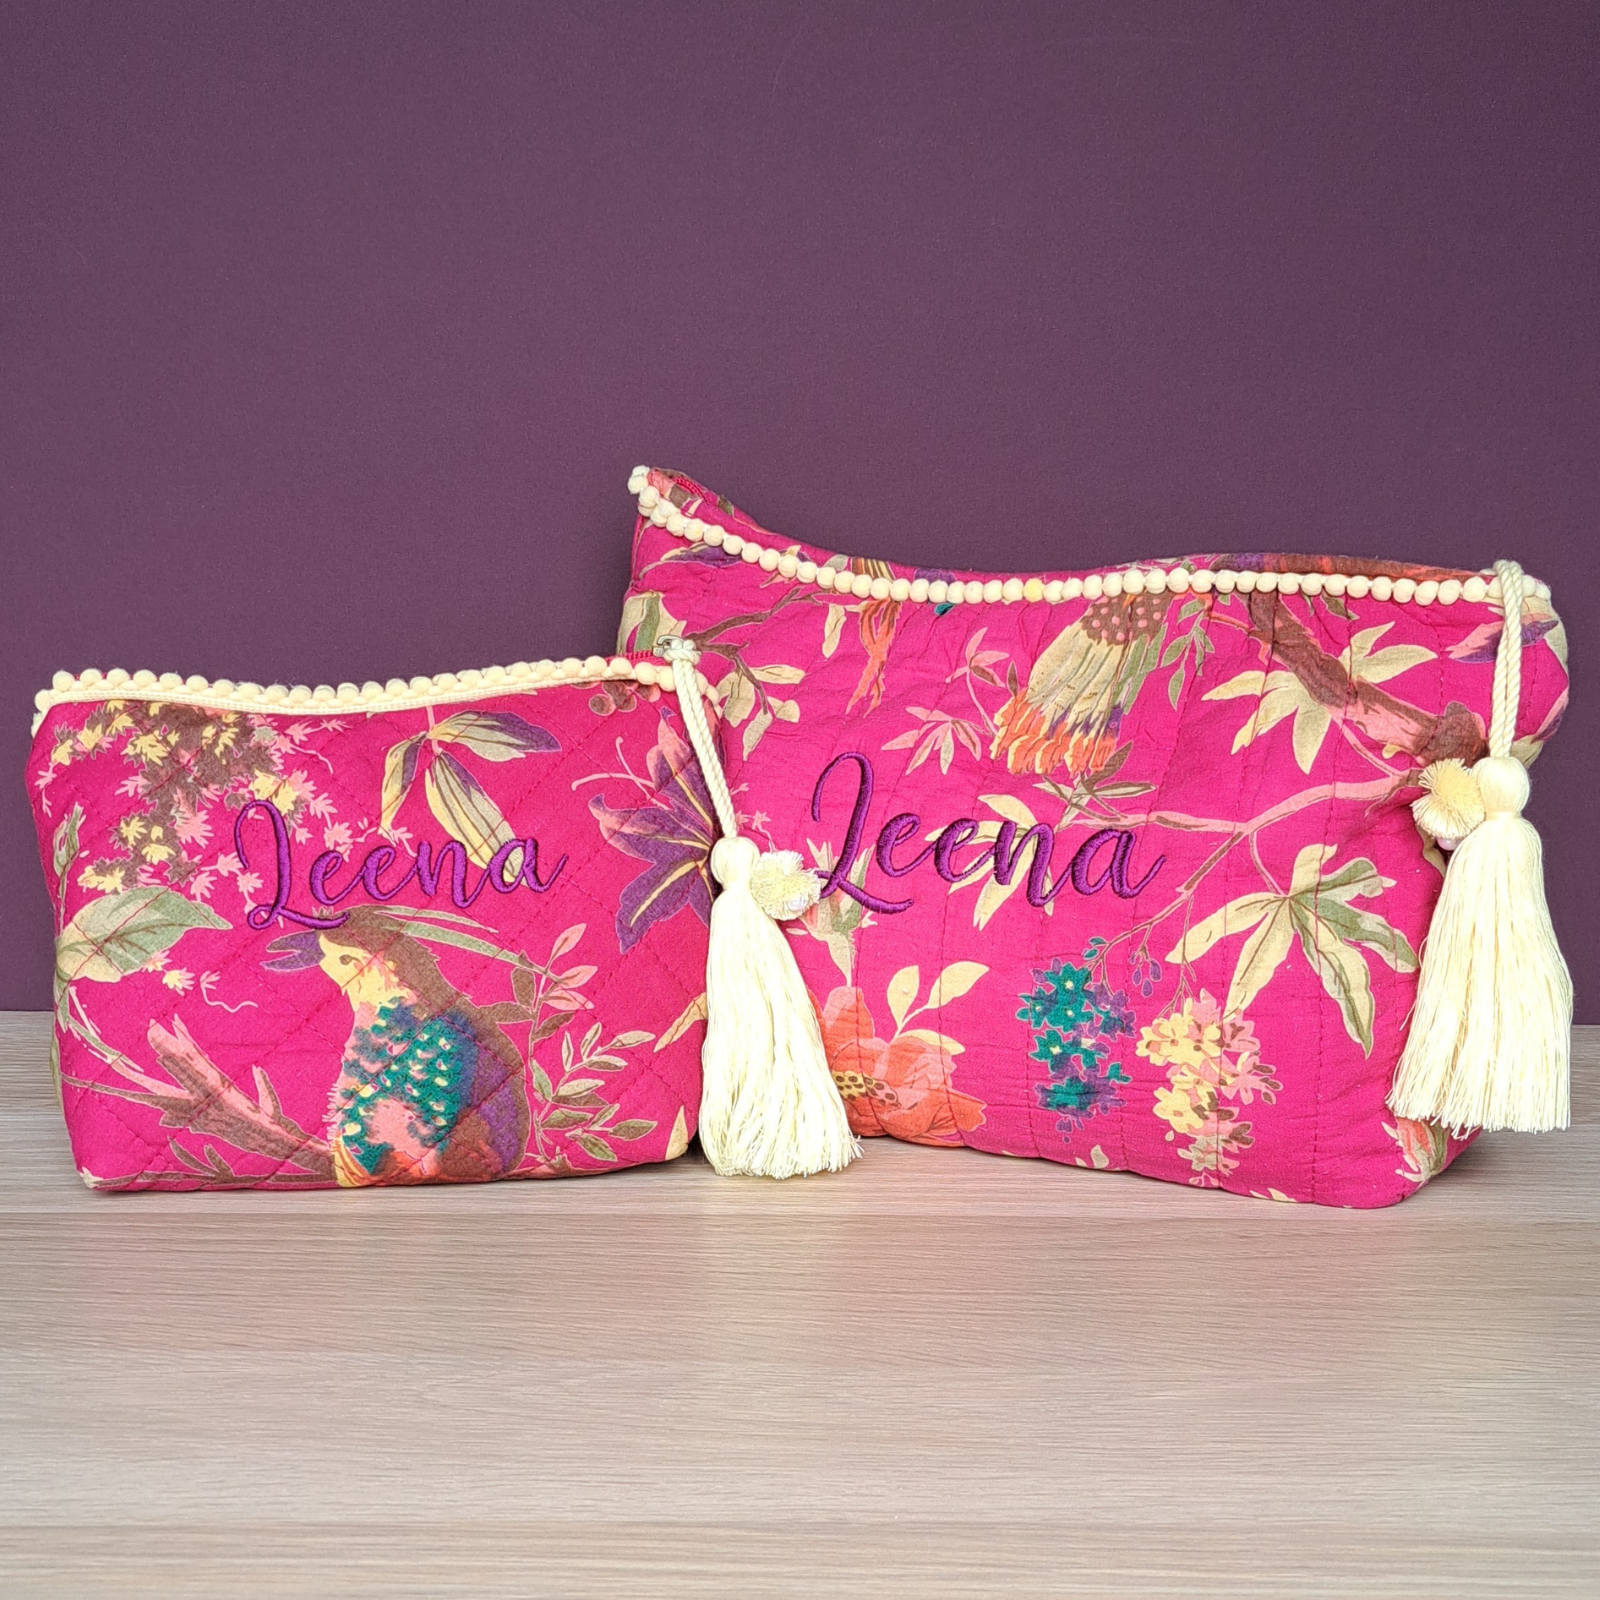 Image of a personalised make up bag and matching toiletries bag. The bags are made from quilted cotton with a vibrant pink design with exotic birds and flowers. The bags are lined with white water resistant fabric and have a lemon coloured tassle on the zip pull as well as lemon pom pom decorations along the top of each bag.